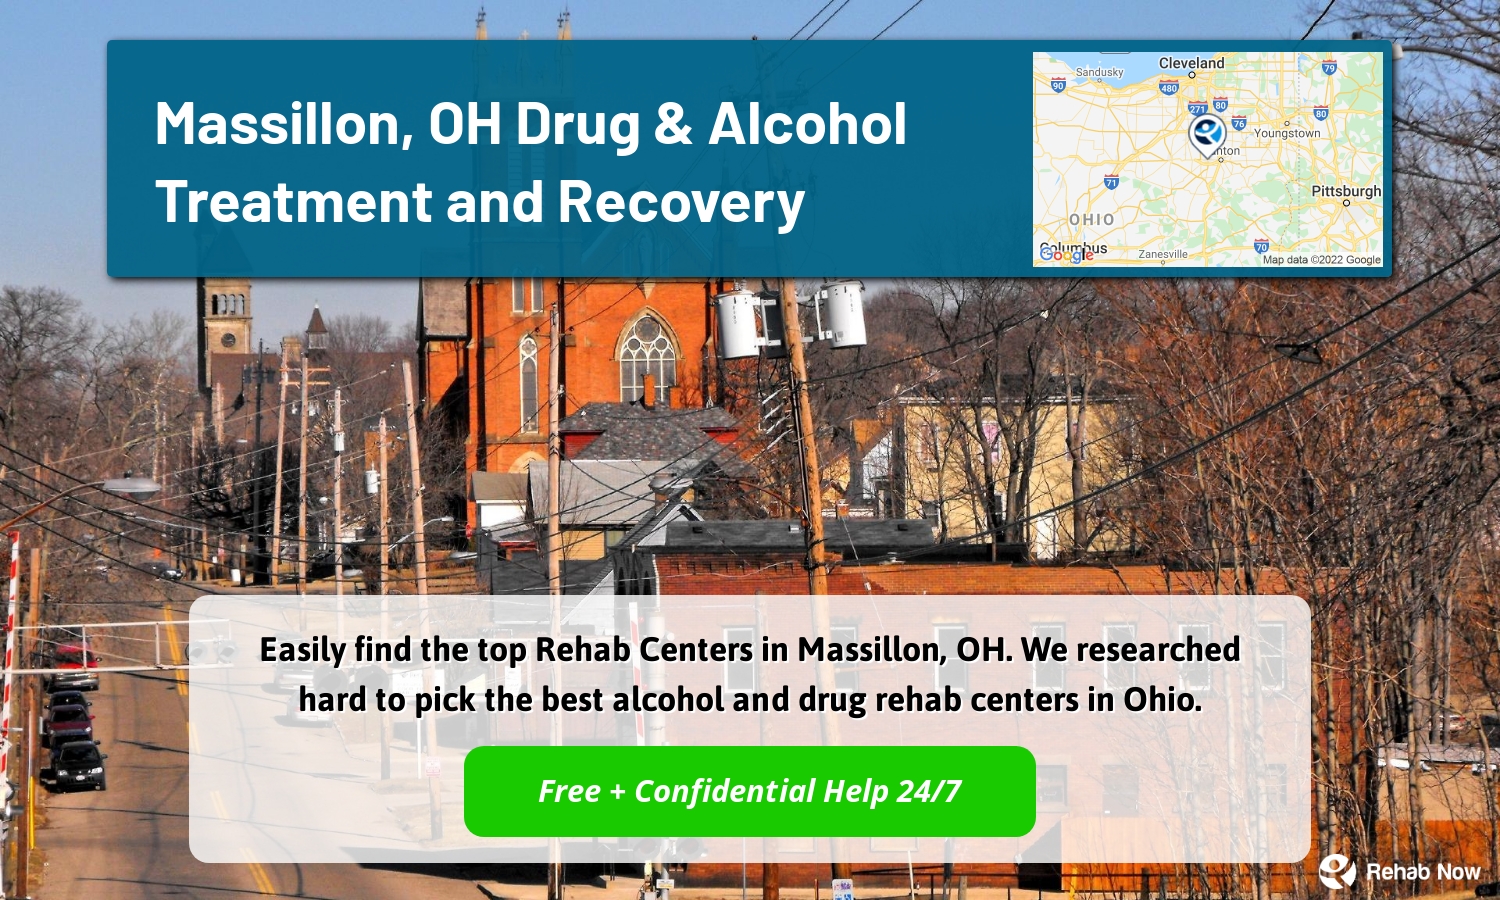 Easily find the top Rehab Centers in Massillon, OH. We researched hard to pick the best alcohol and drug rehab centers in Ohio.